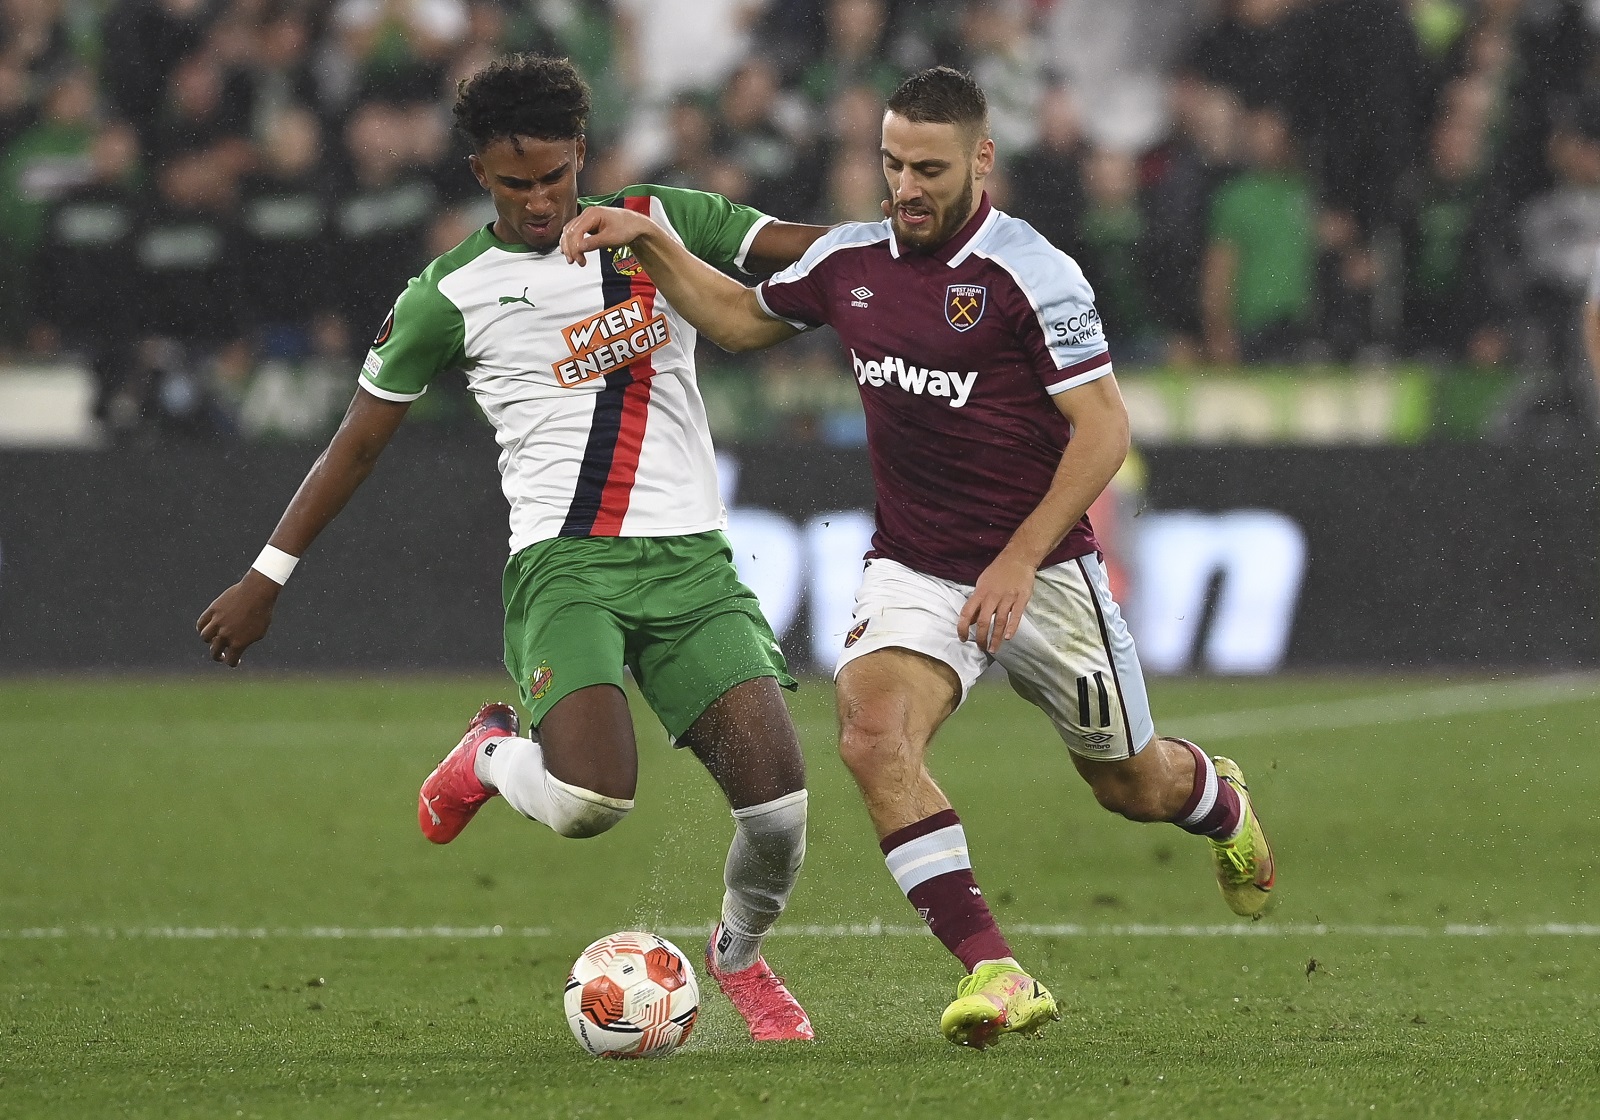 epa09498607 Rapid Vienna's Emanuel Aiwu (L) in action against West Ham's Nikola Vlasic (R) during the UEFA Europa League group H soccer match between West Ham United and Rapid Vienna in London, Britain, 30 September 2021.  EPA/NEIL HALL